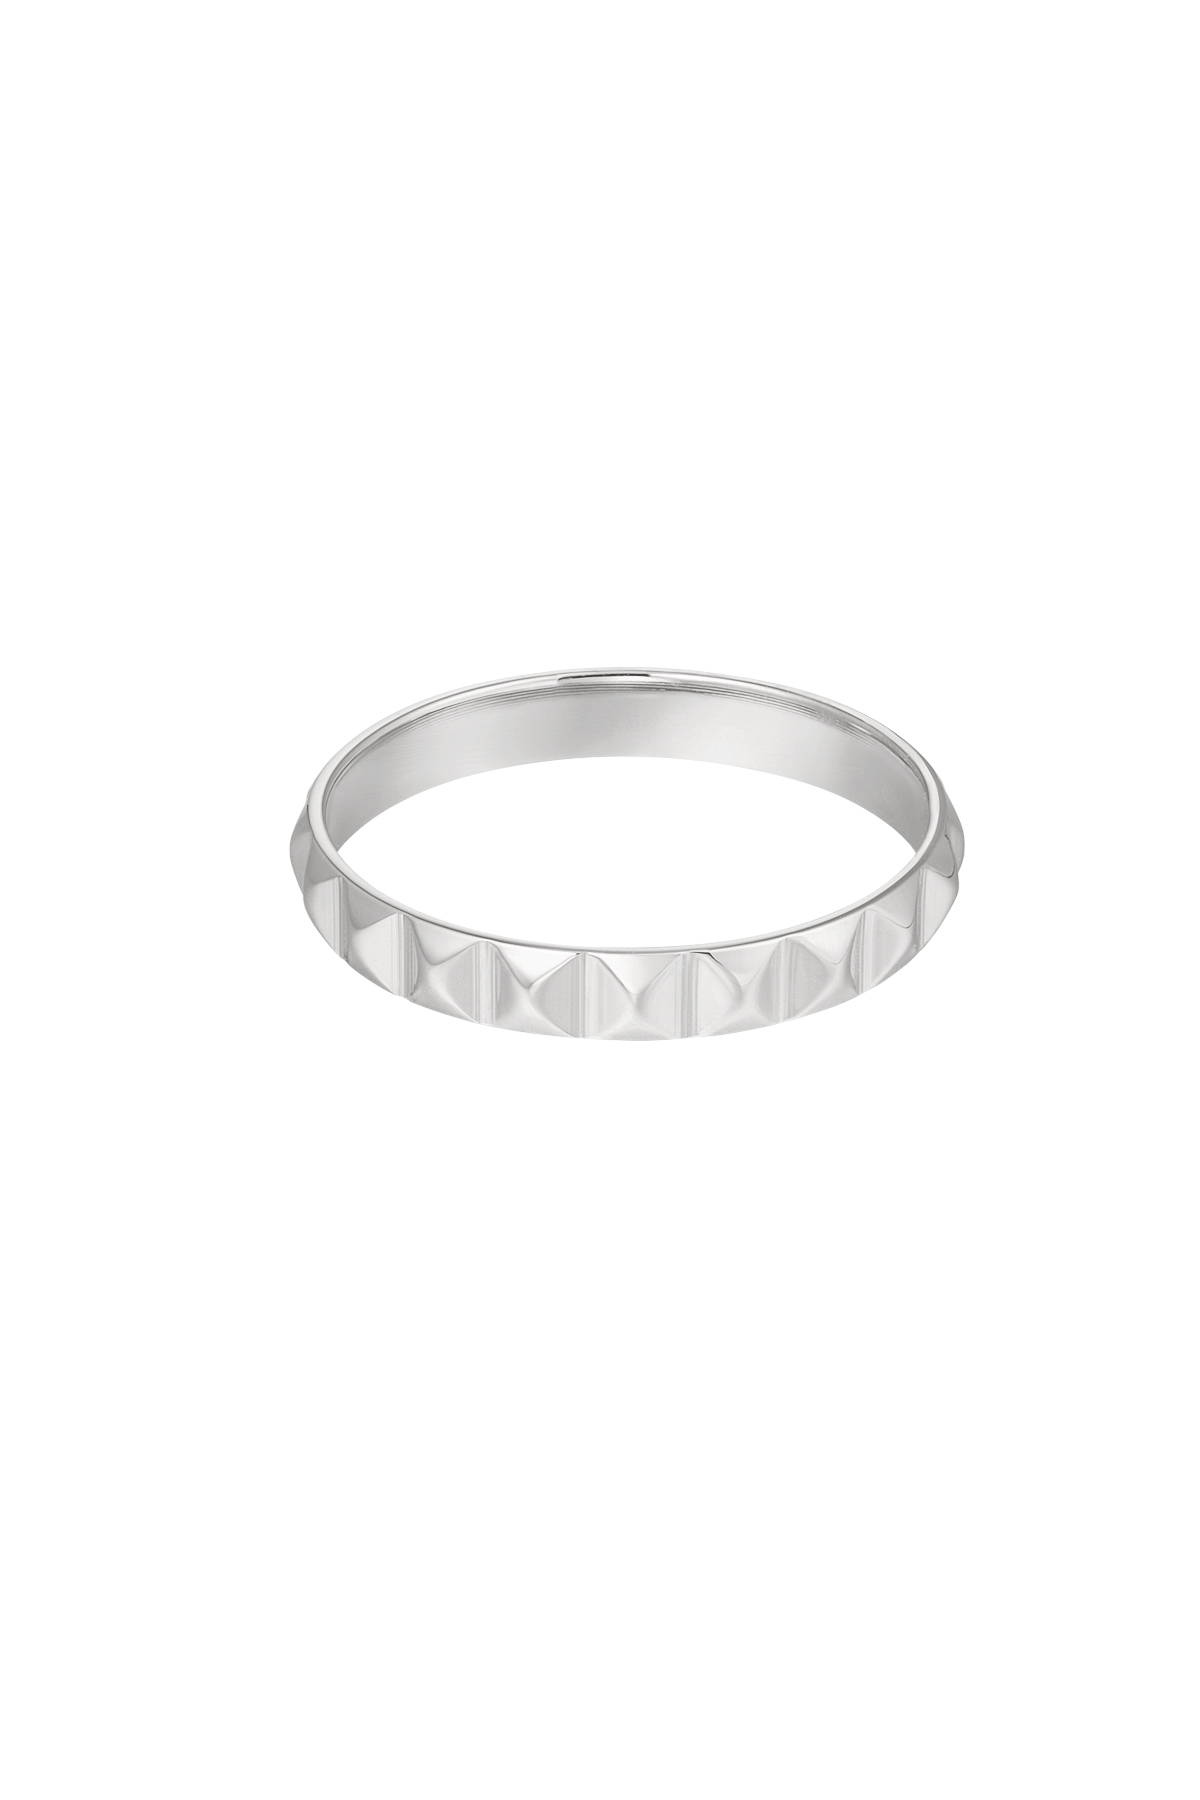 Ring triangles print - silver h5 